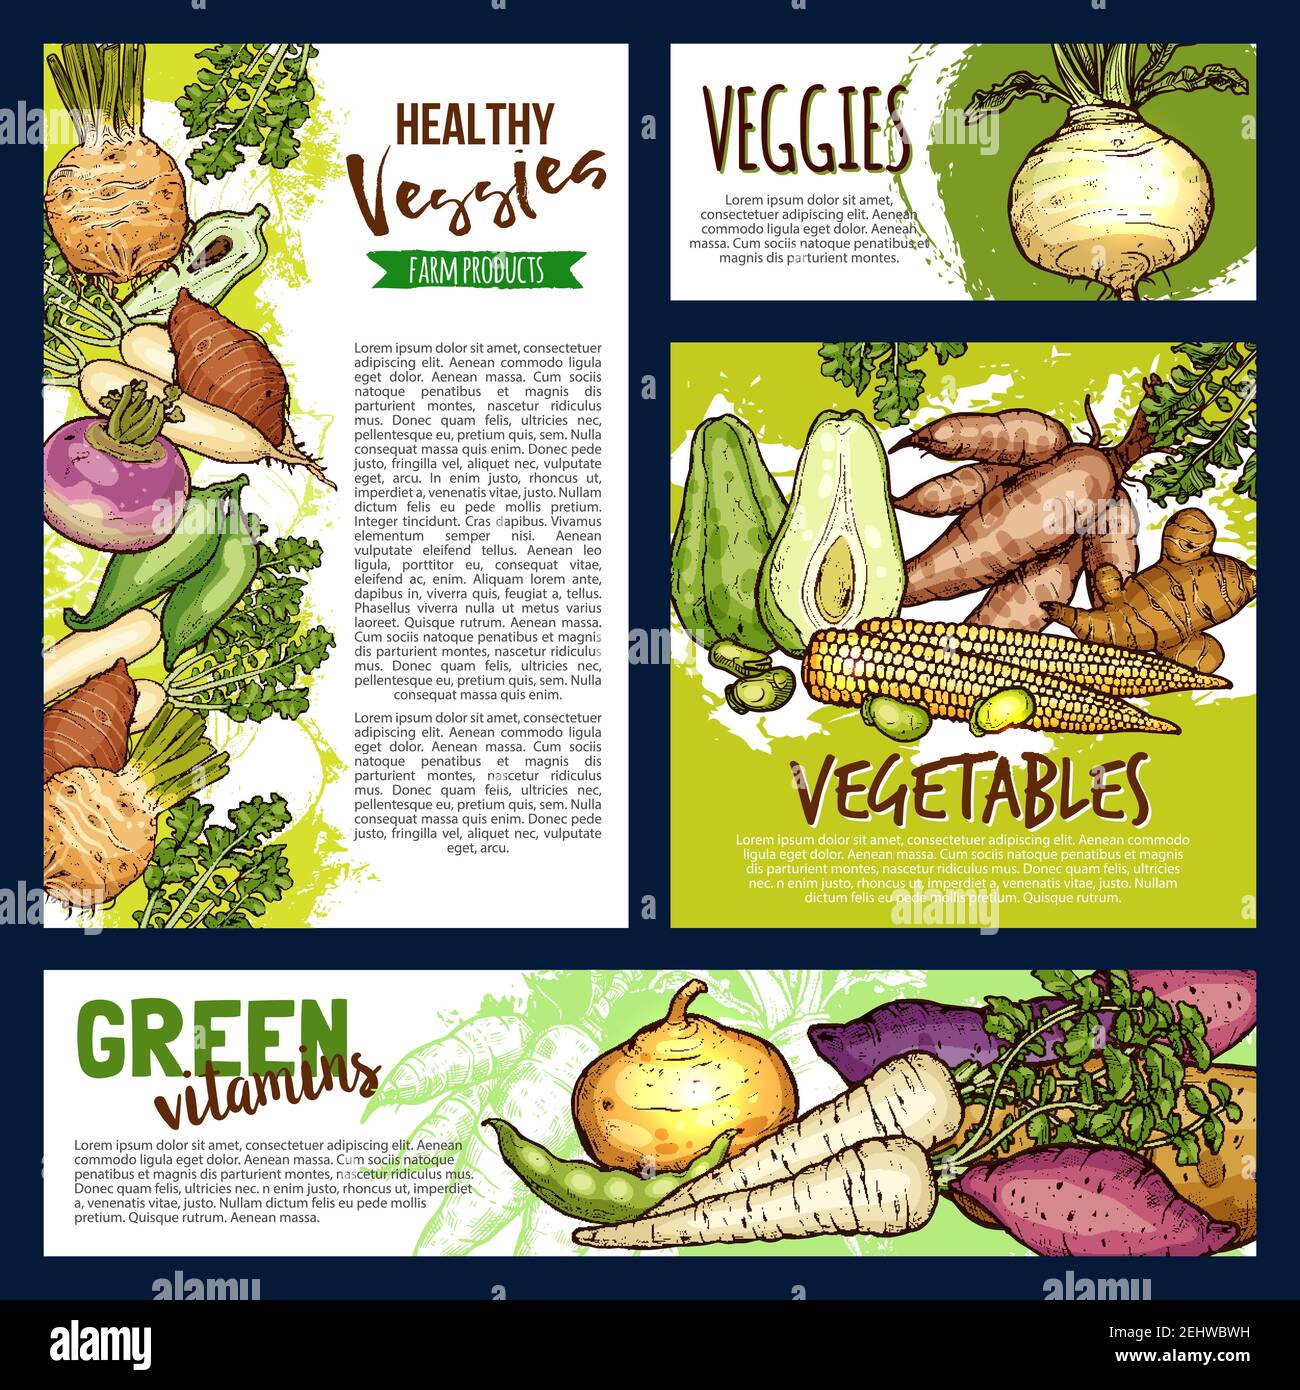 Vegetables and veggies sketch banners. Vector farmer agriculture food potato, radish or turnip and beans, natural jicama and organic cassava manioc wi Stock Vector